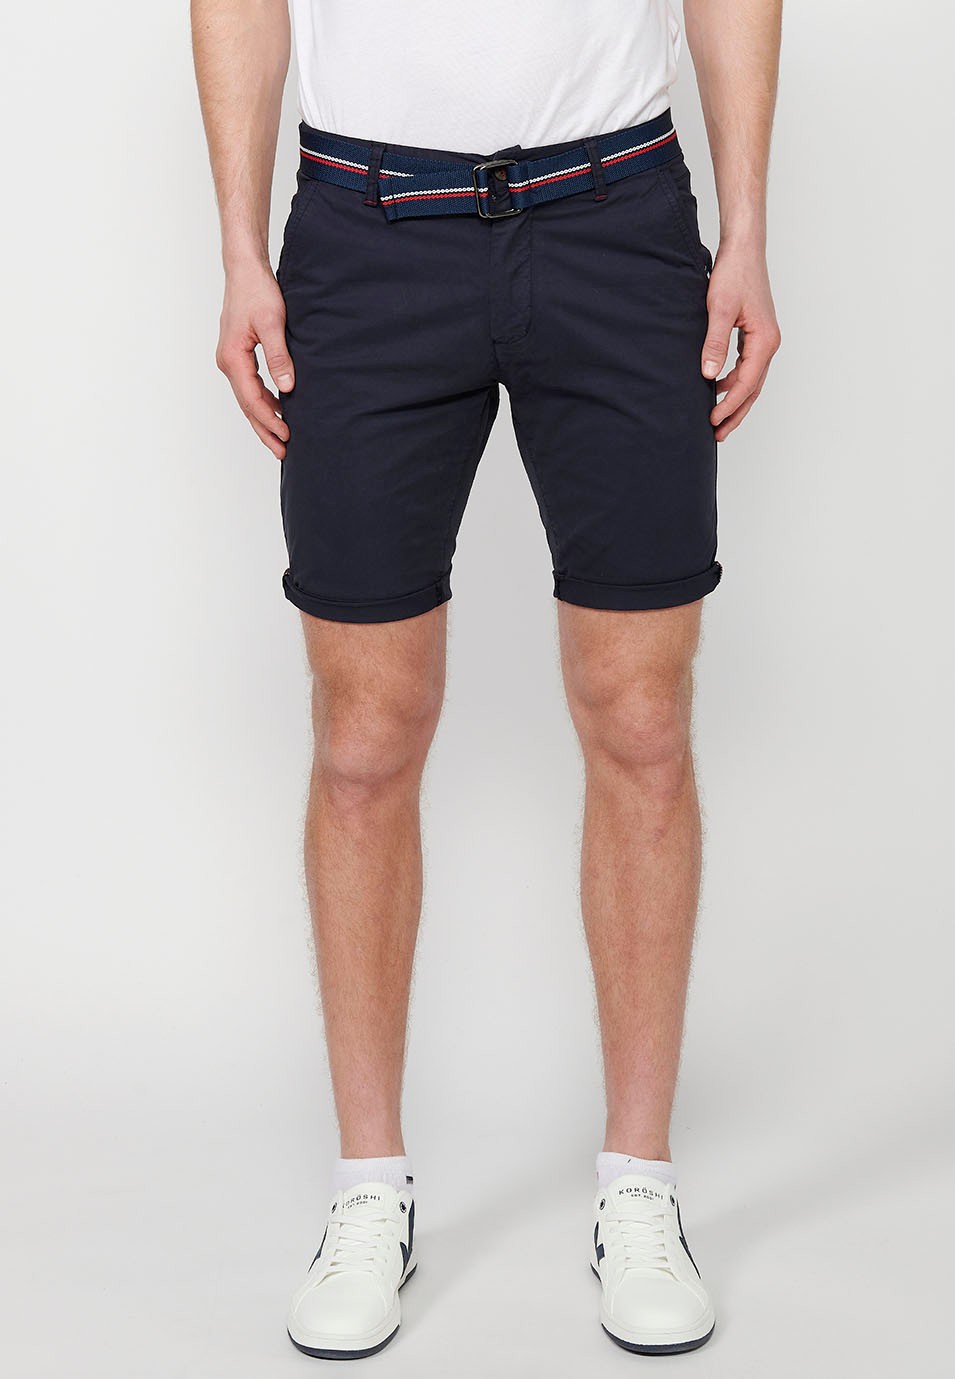 Shorts with turn-up finish with front closure with zipper and button and belt in Navy Color for Men